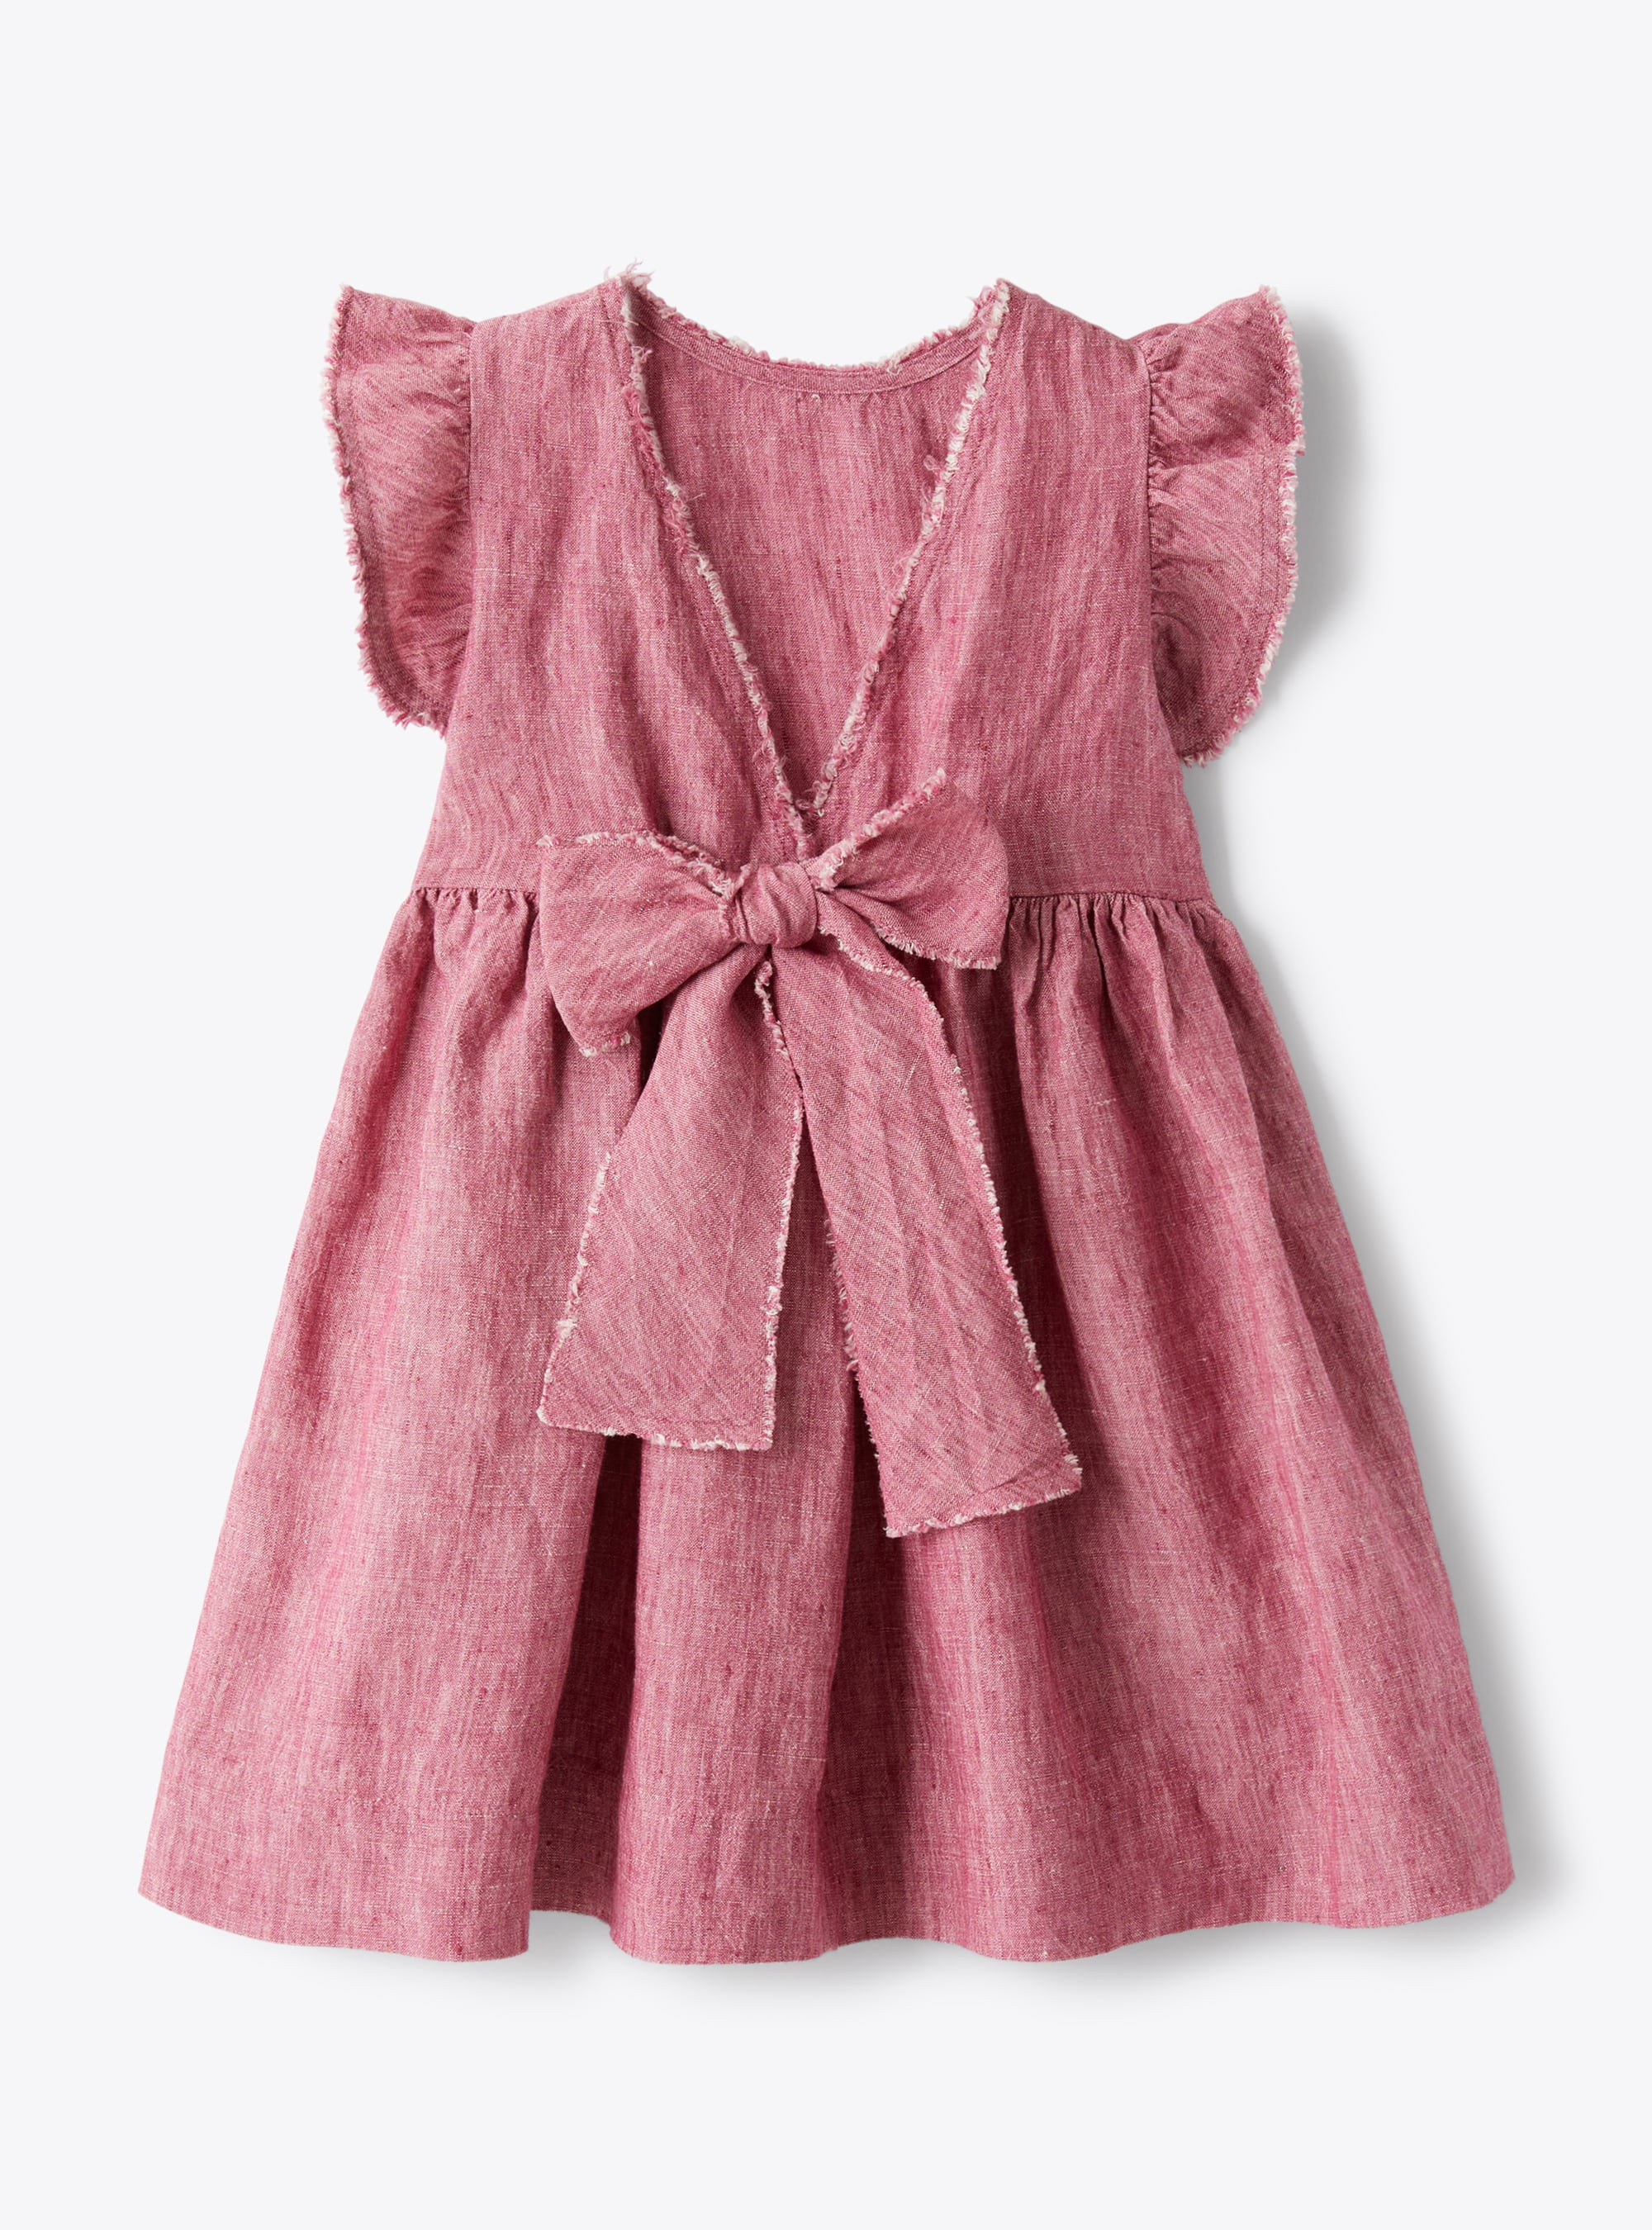 Linen dress with a bow detail in onion purple | Il Gufo